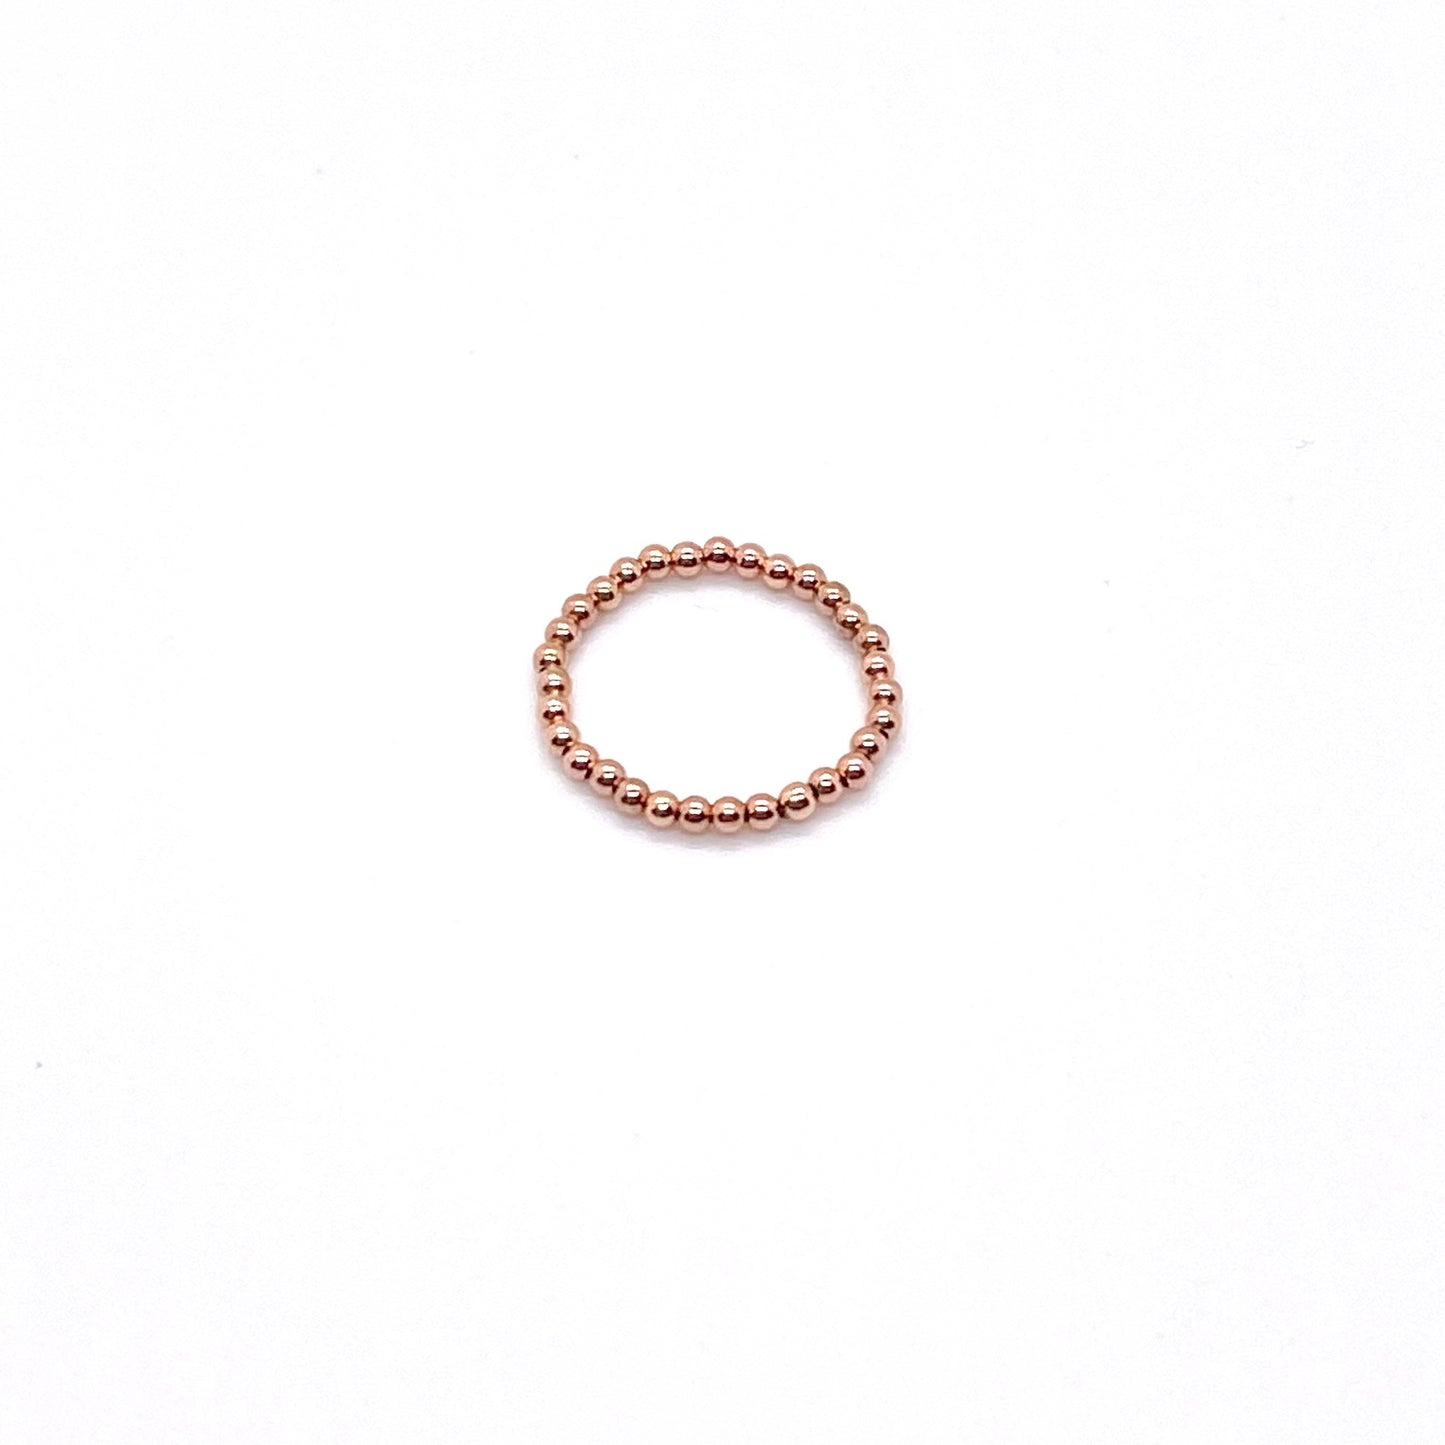 Rose gold bead ring with 2mm 14K gold filled waterproof beads on elastic stretch cord.